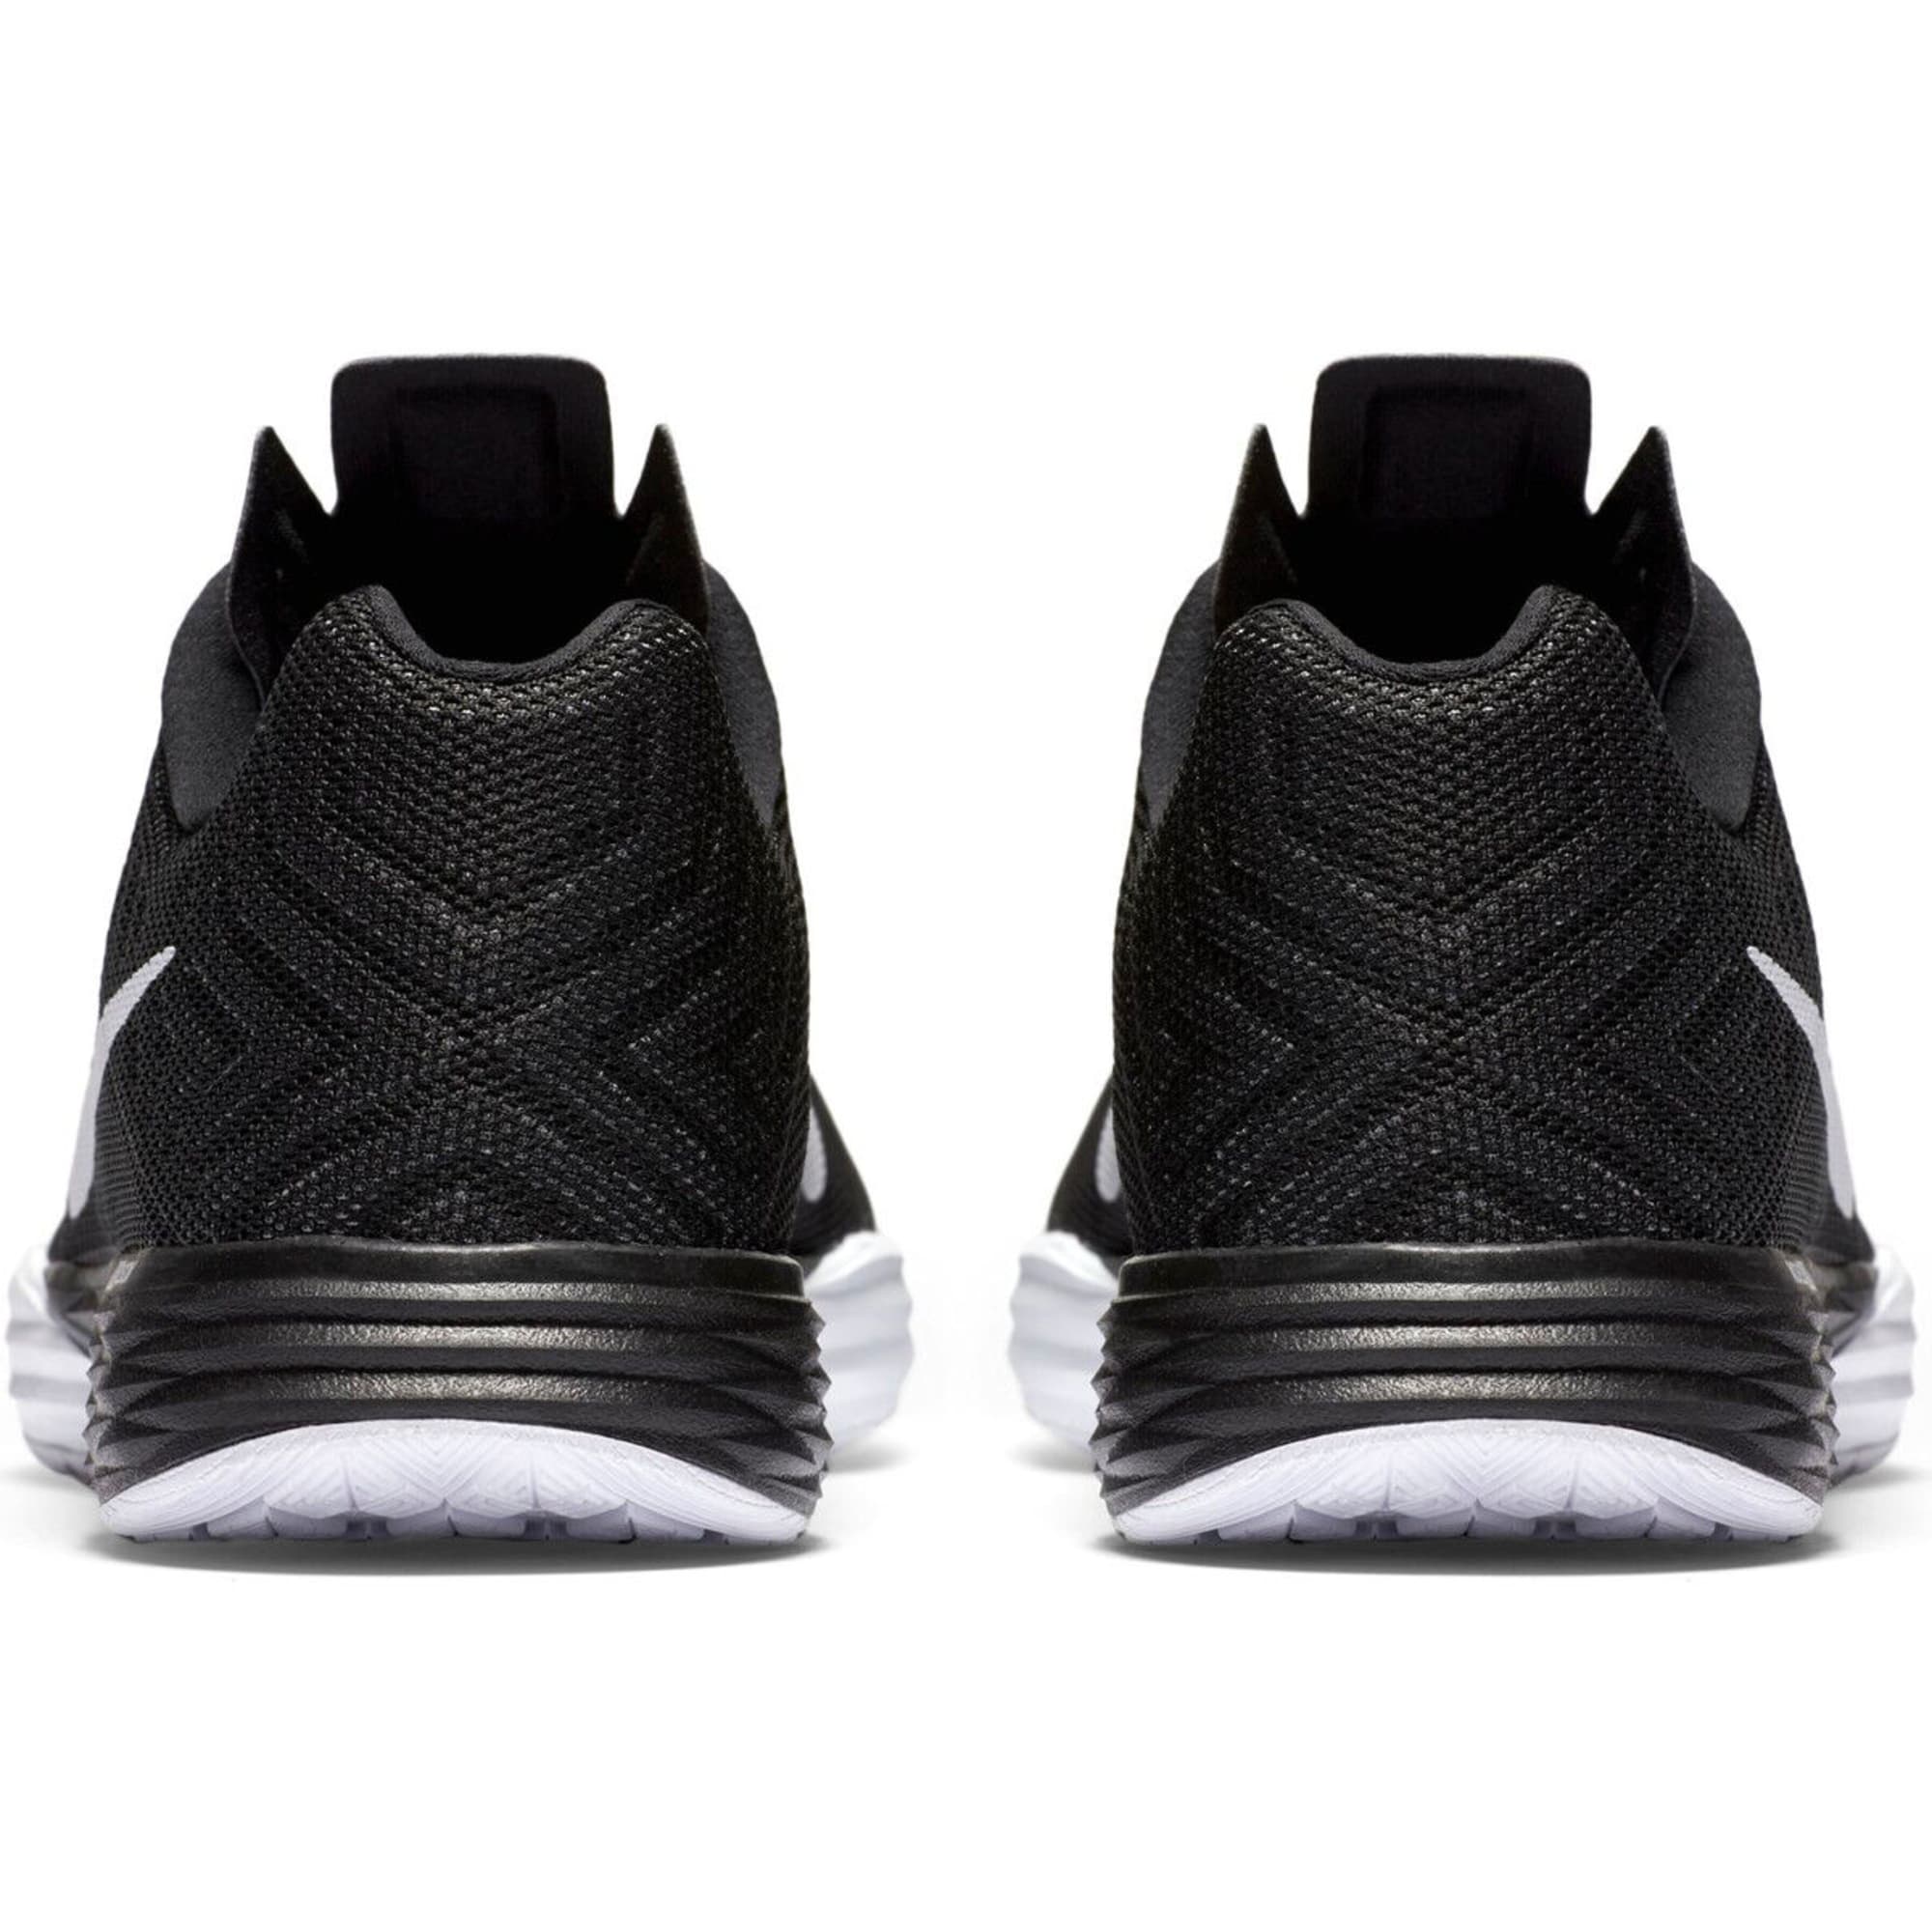 matchmaker cliënt Of anders NIKE Men's Train Prime Iron Dual Fusion Training Shoes - Bob's Stores